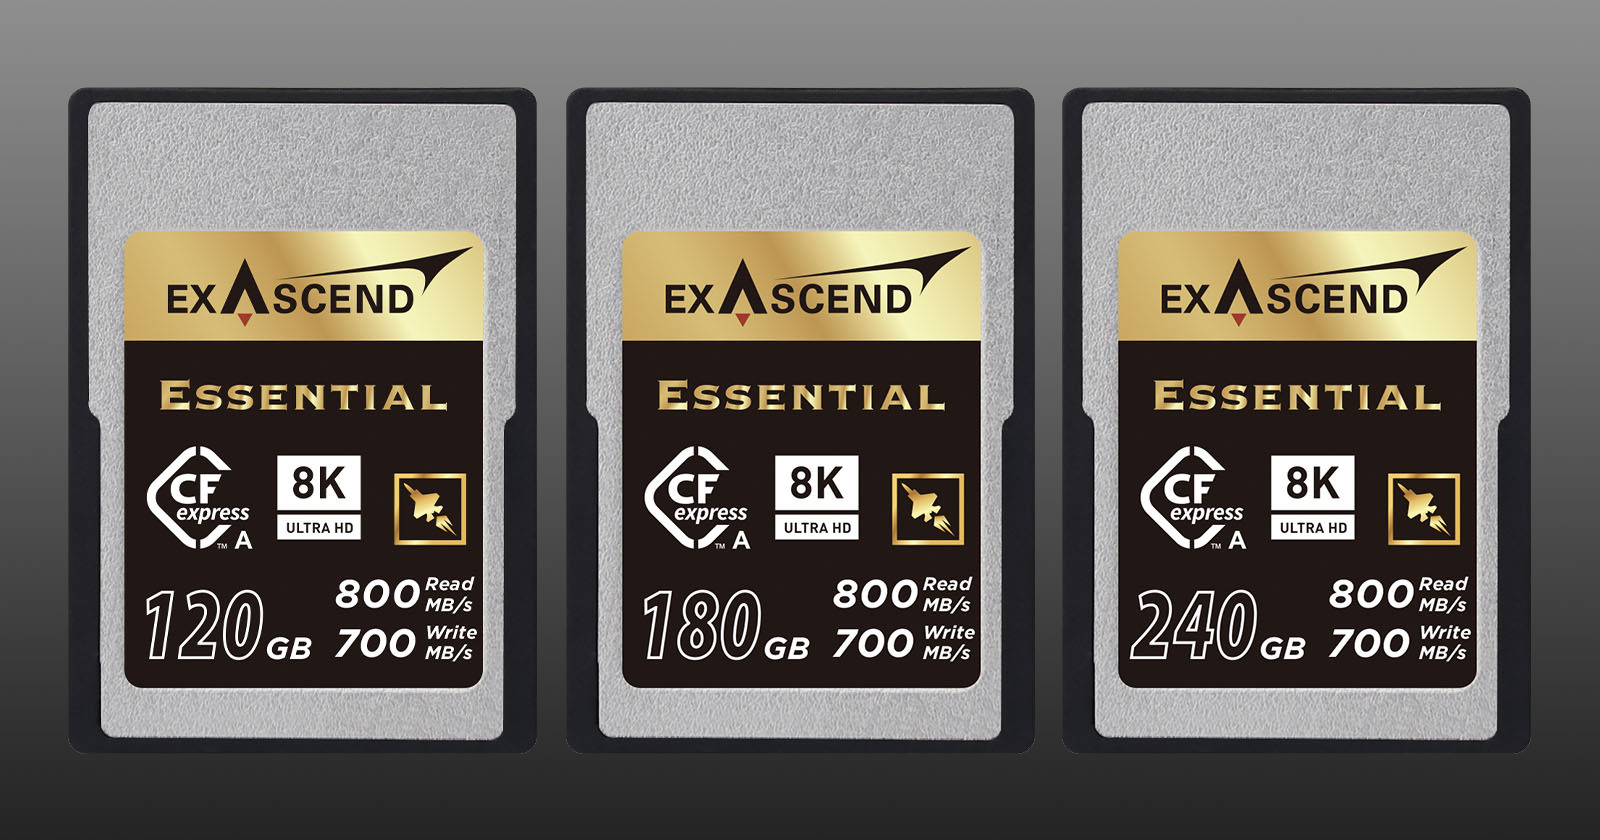 Exascend Announces New 240GB CFexpress Type A Cards - Exibart Street